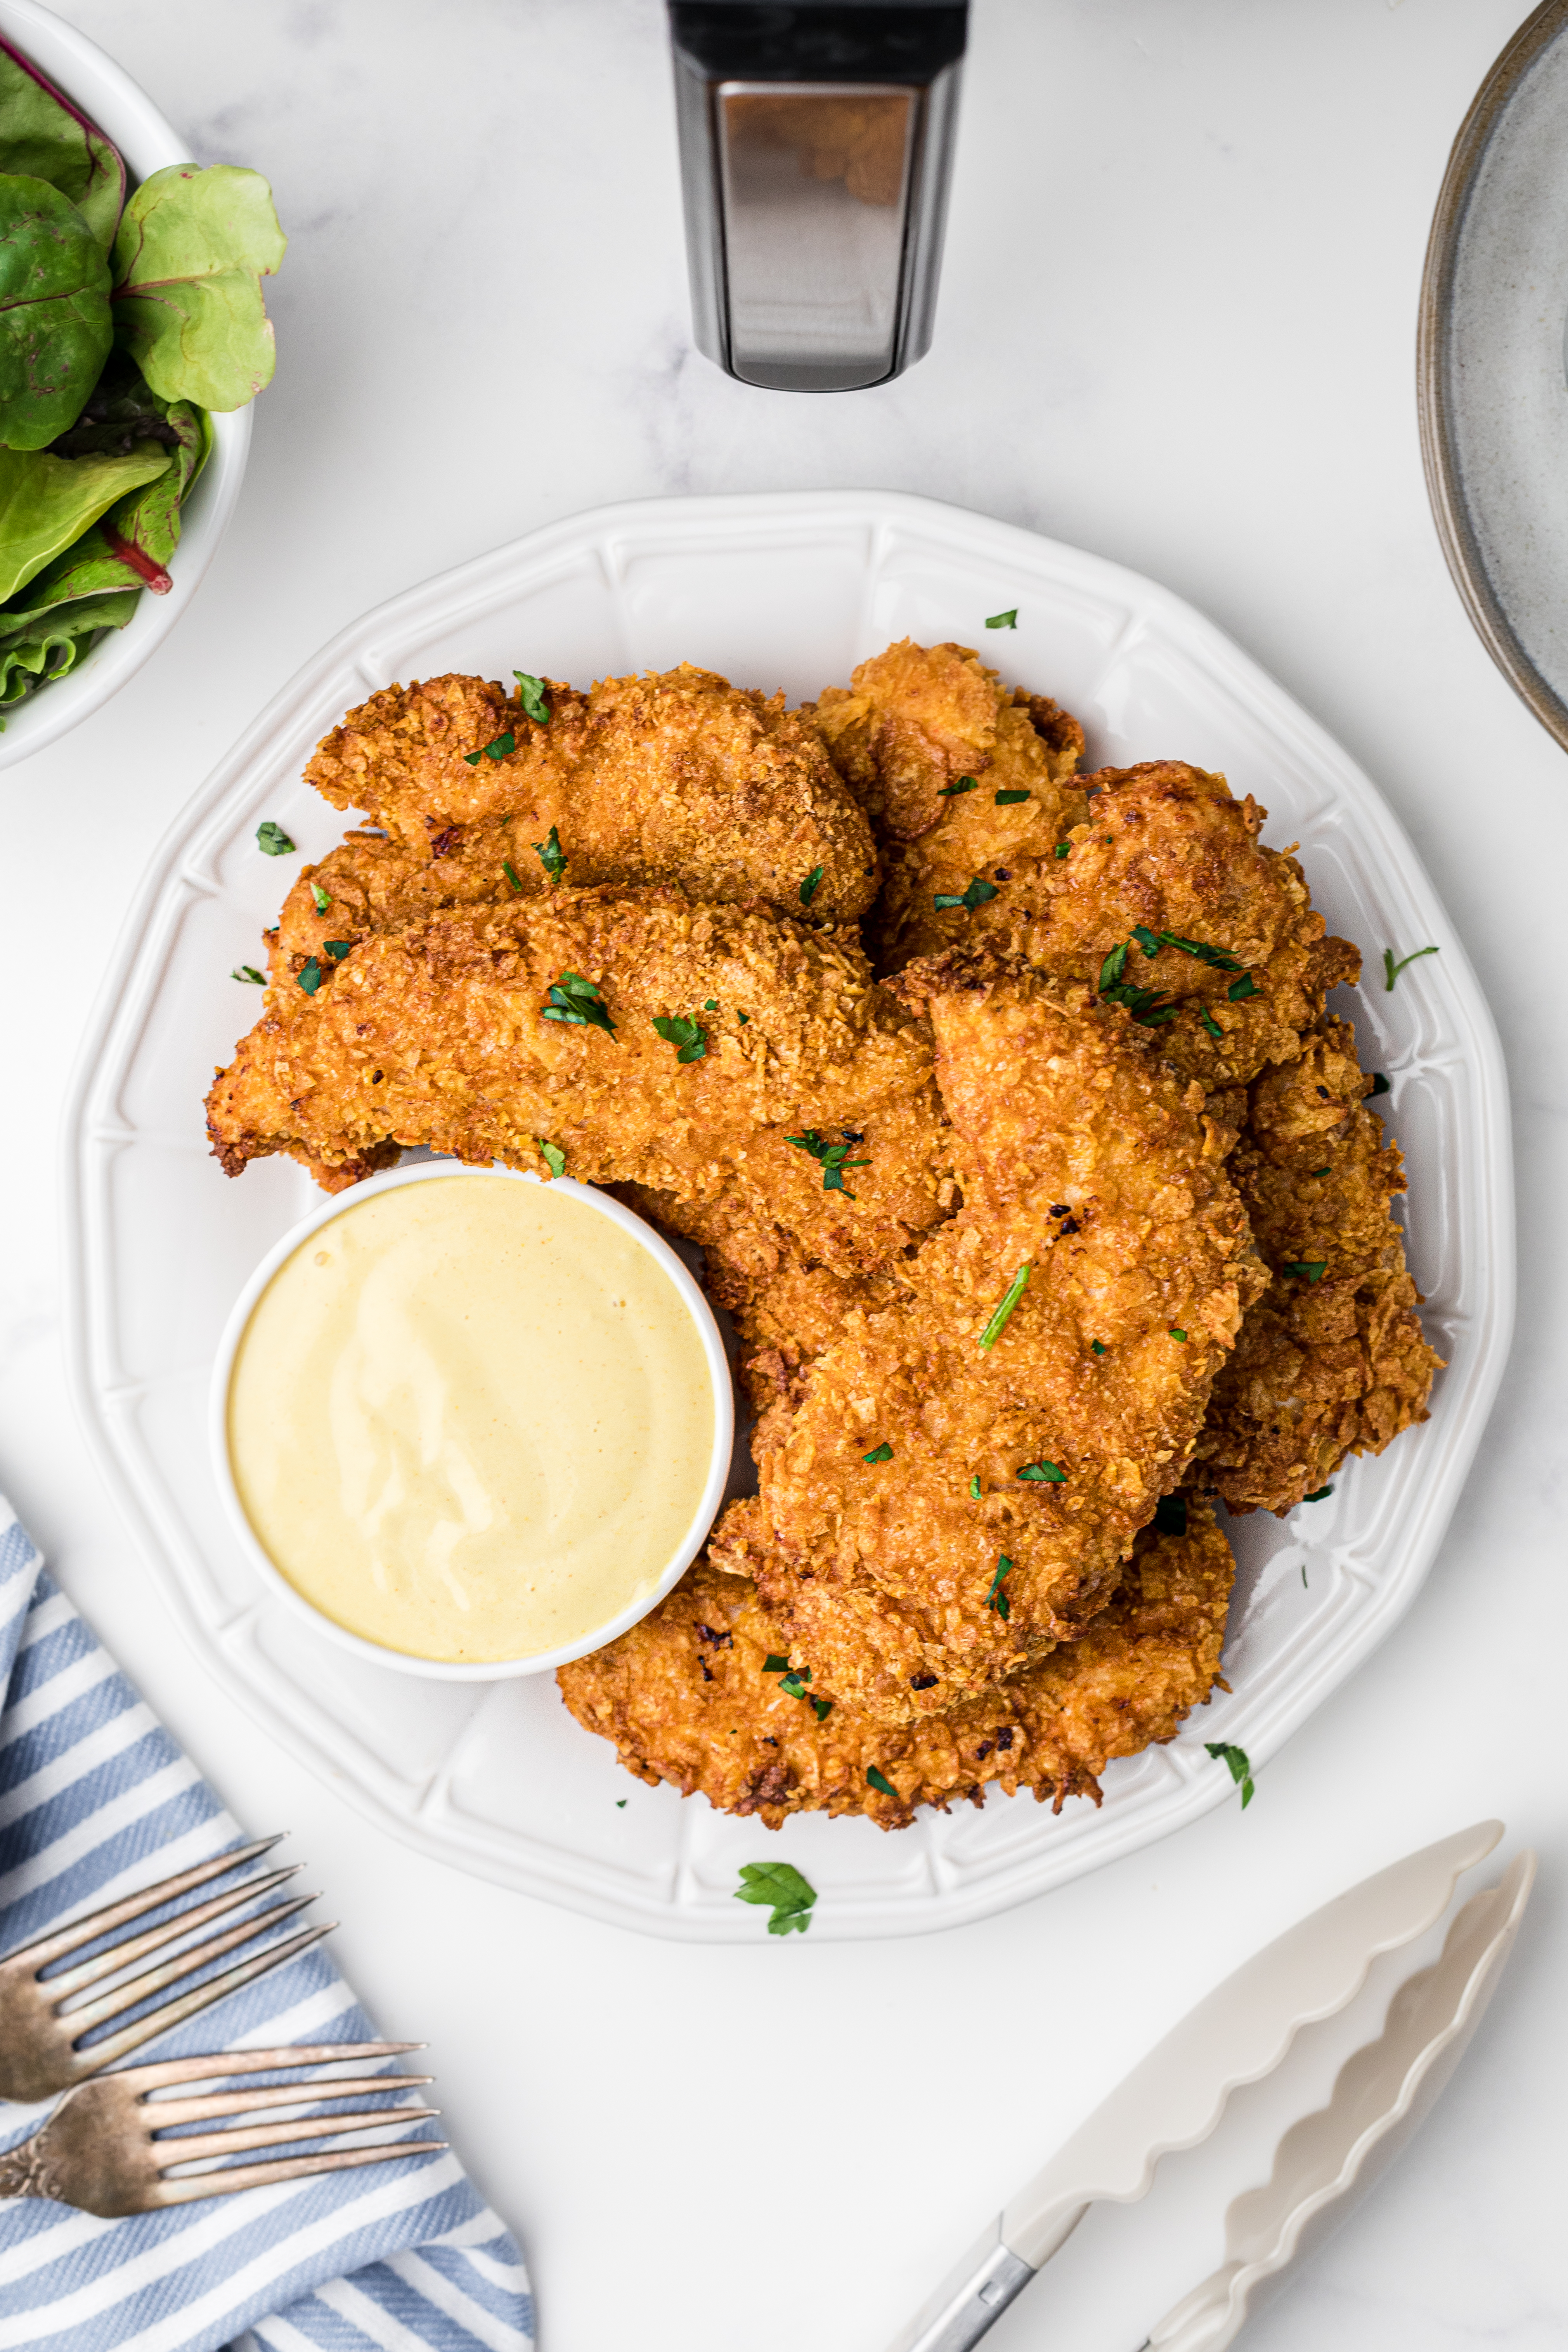 Pro Tips For Making Copycat Zaxyby's Chicken Fingers